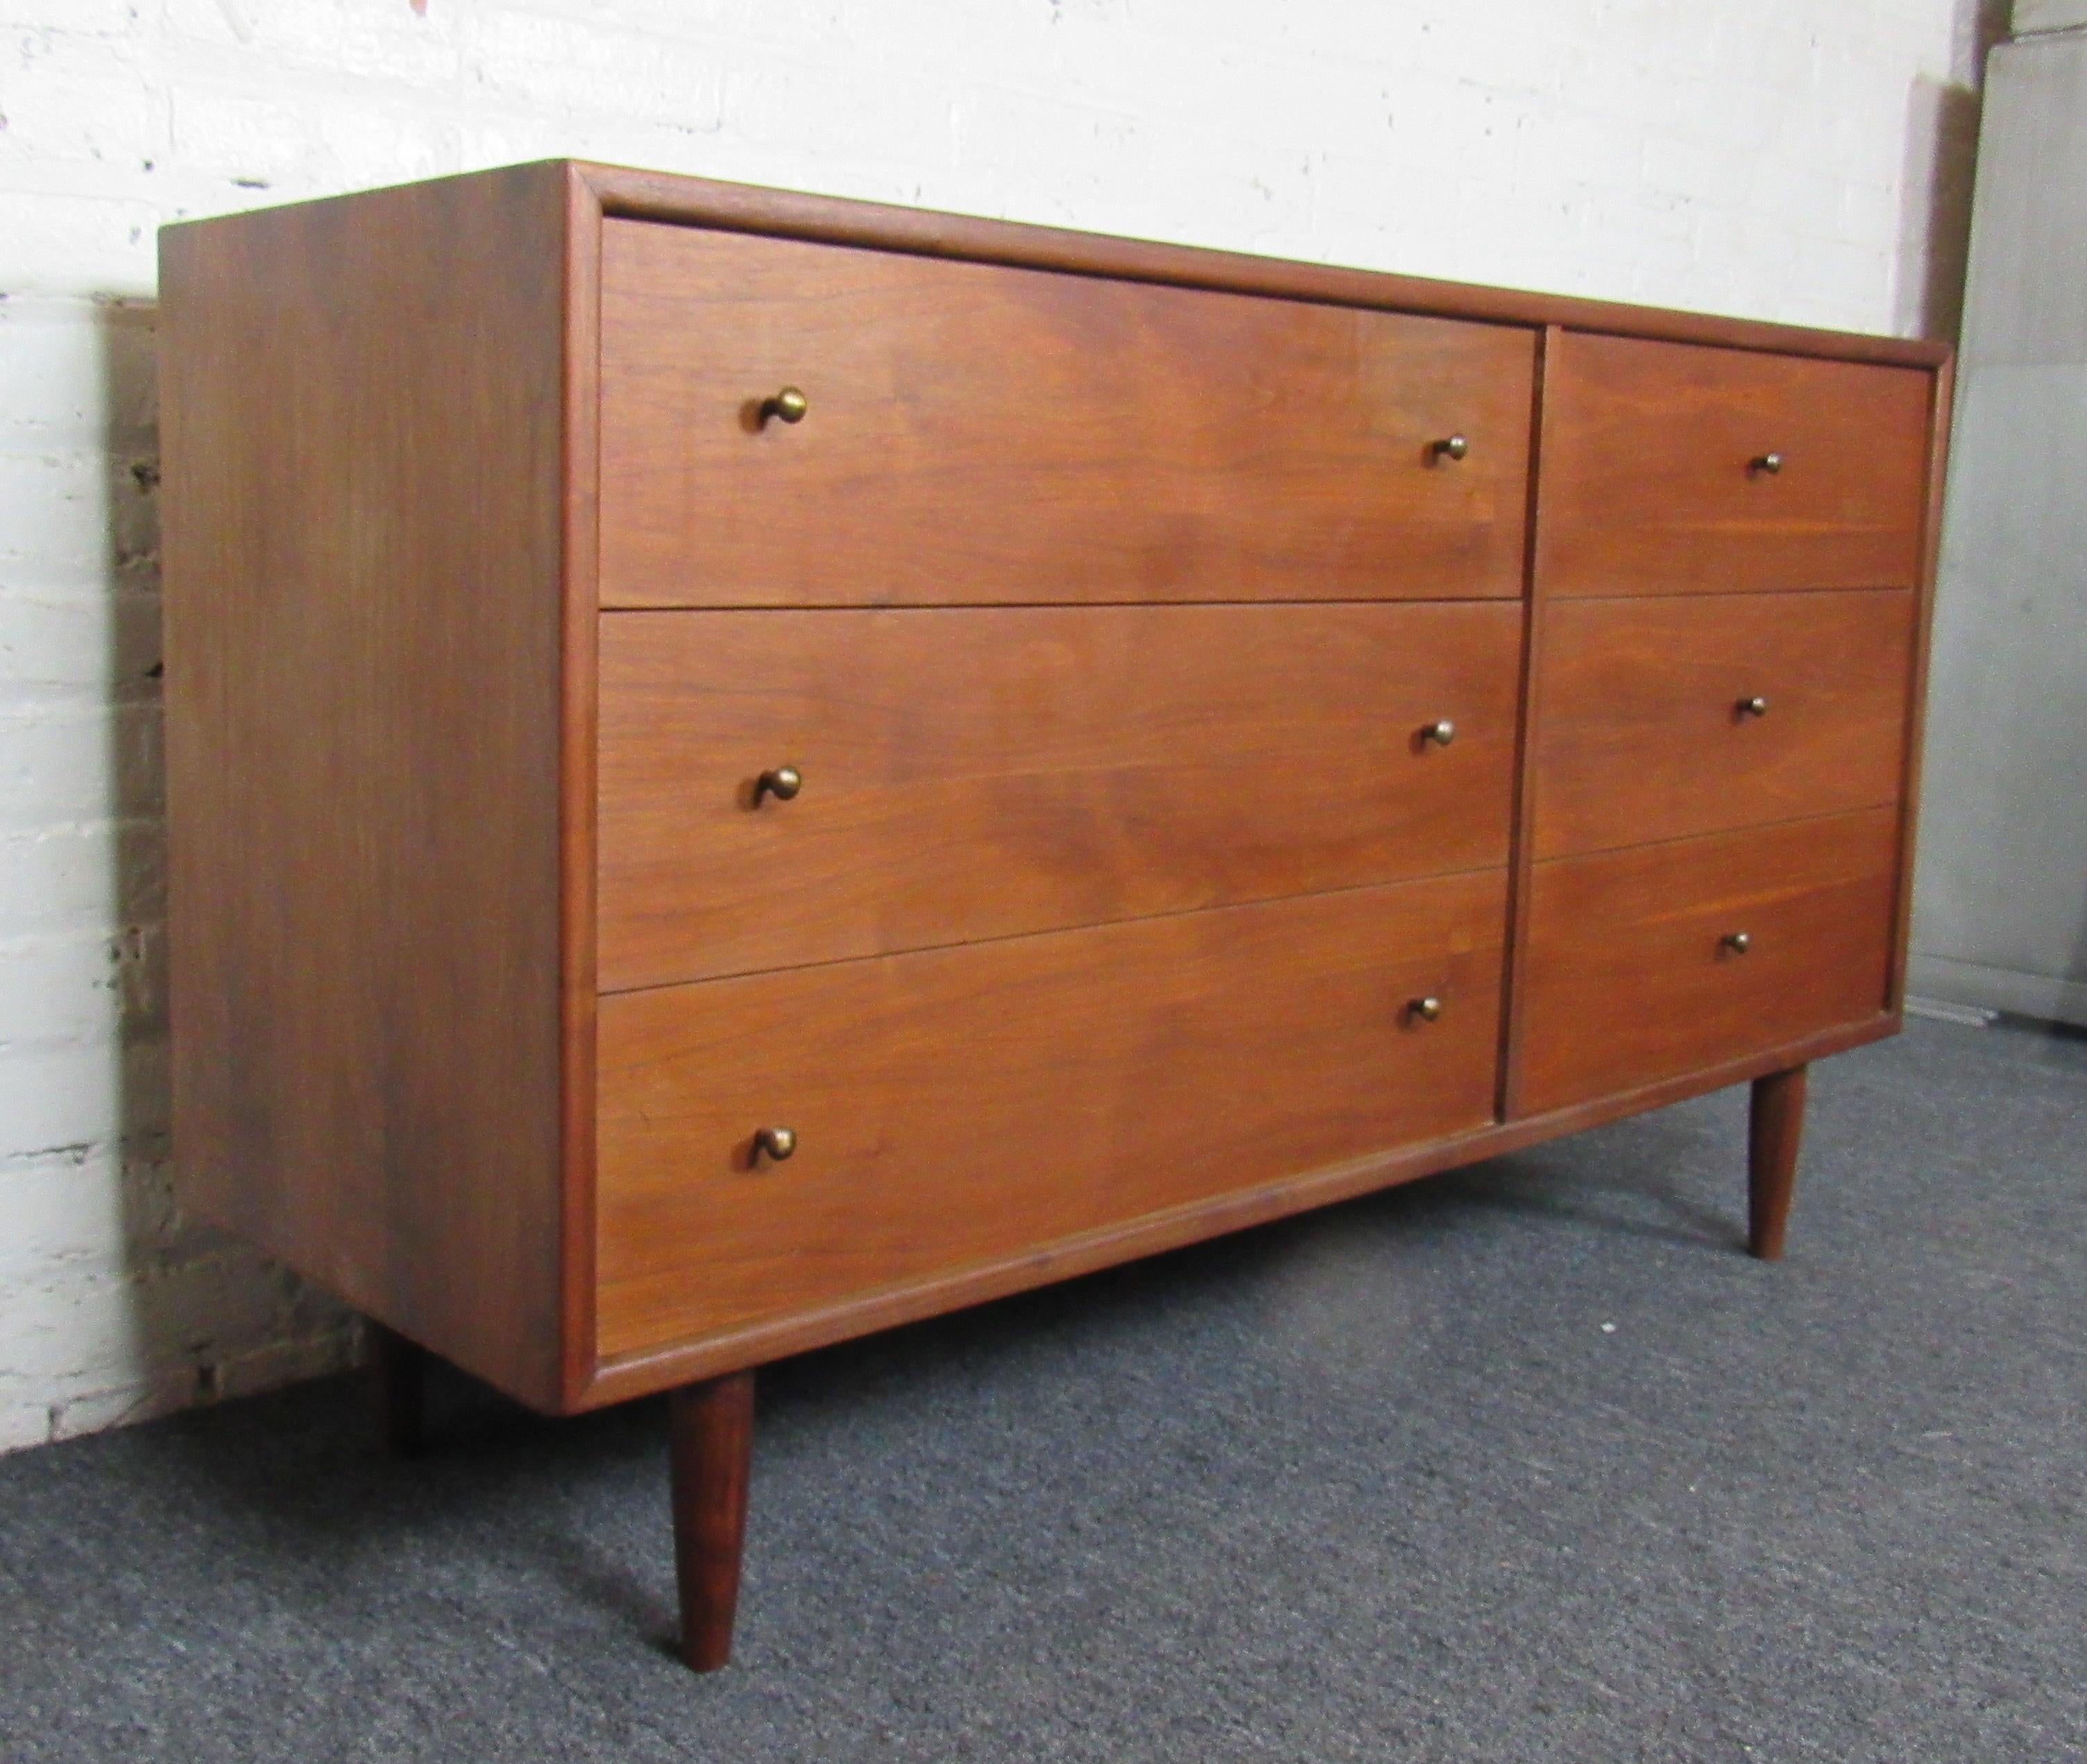 A classic and sturdy midcentury piece, this server features the rich colors of walnut wood and six drawers with brass knobs. 
Please confirm the item location with the dealer. (NJ/NY).